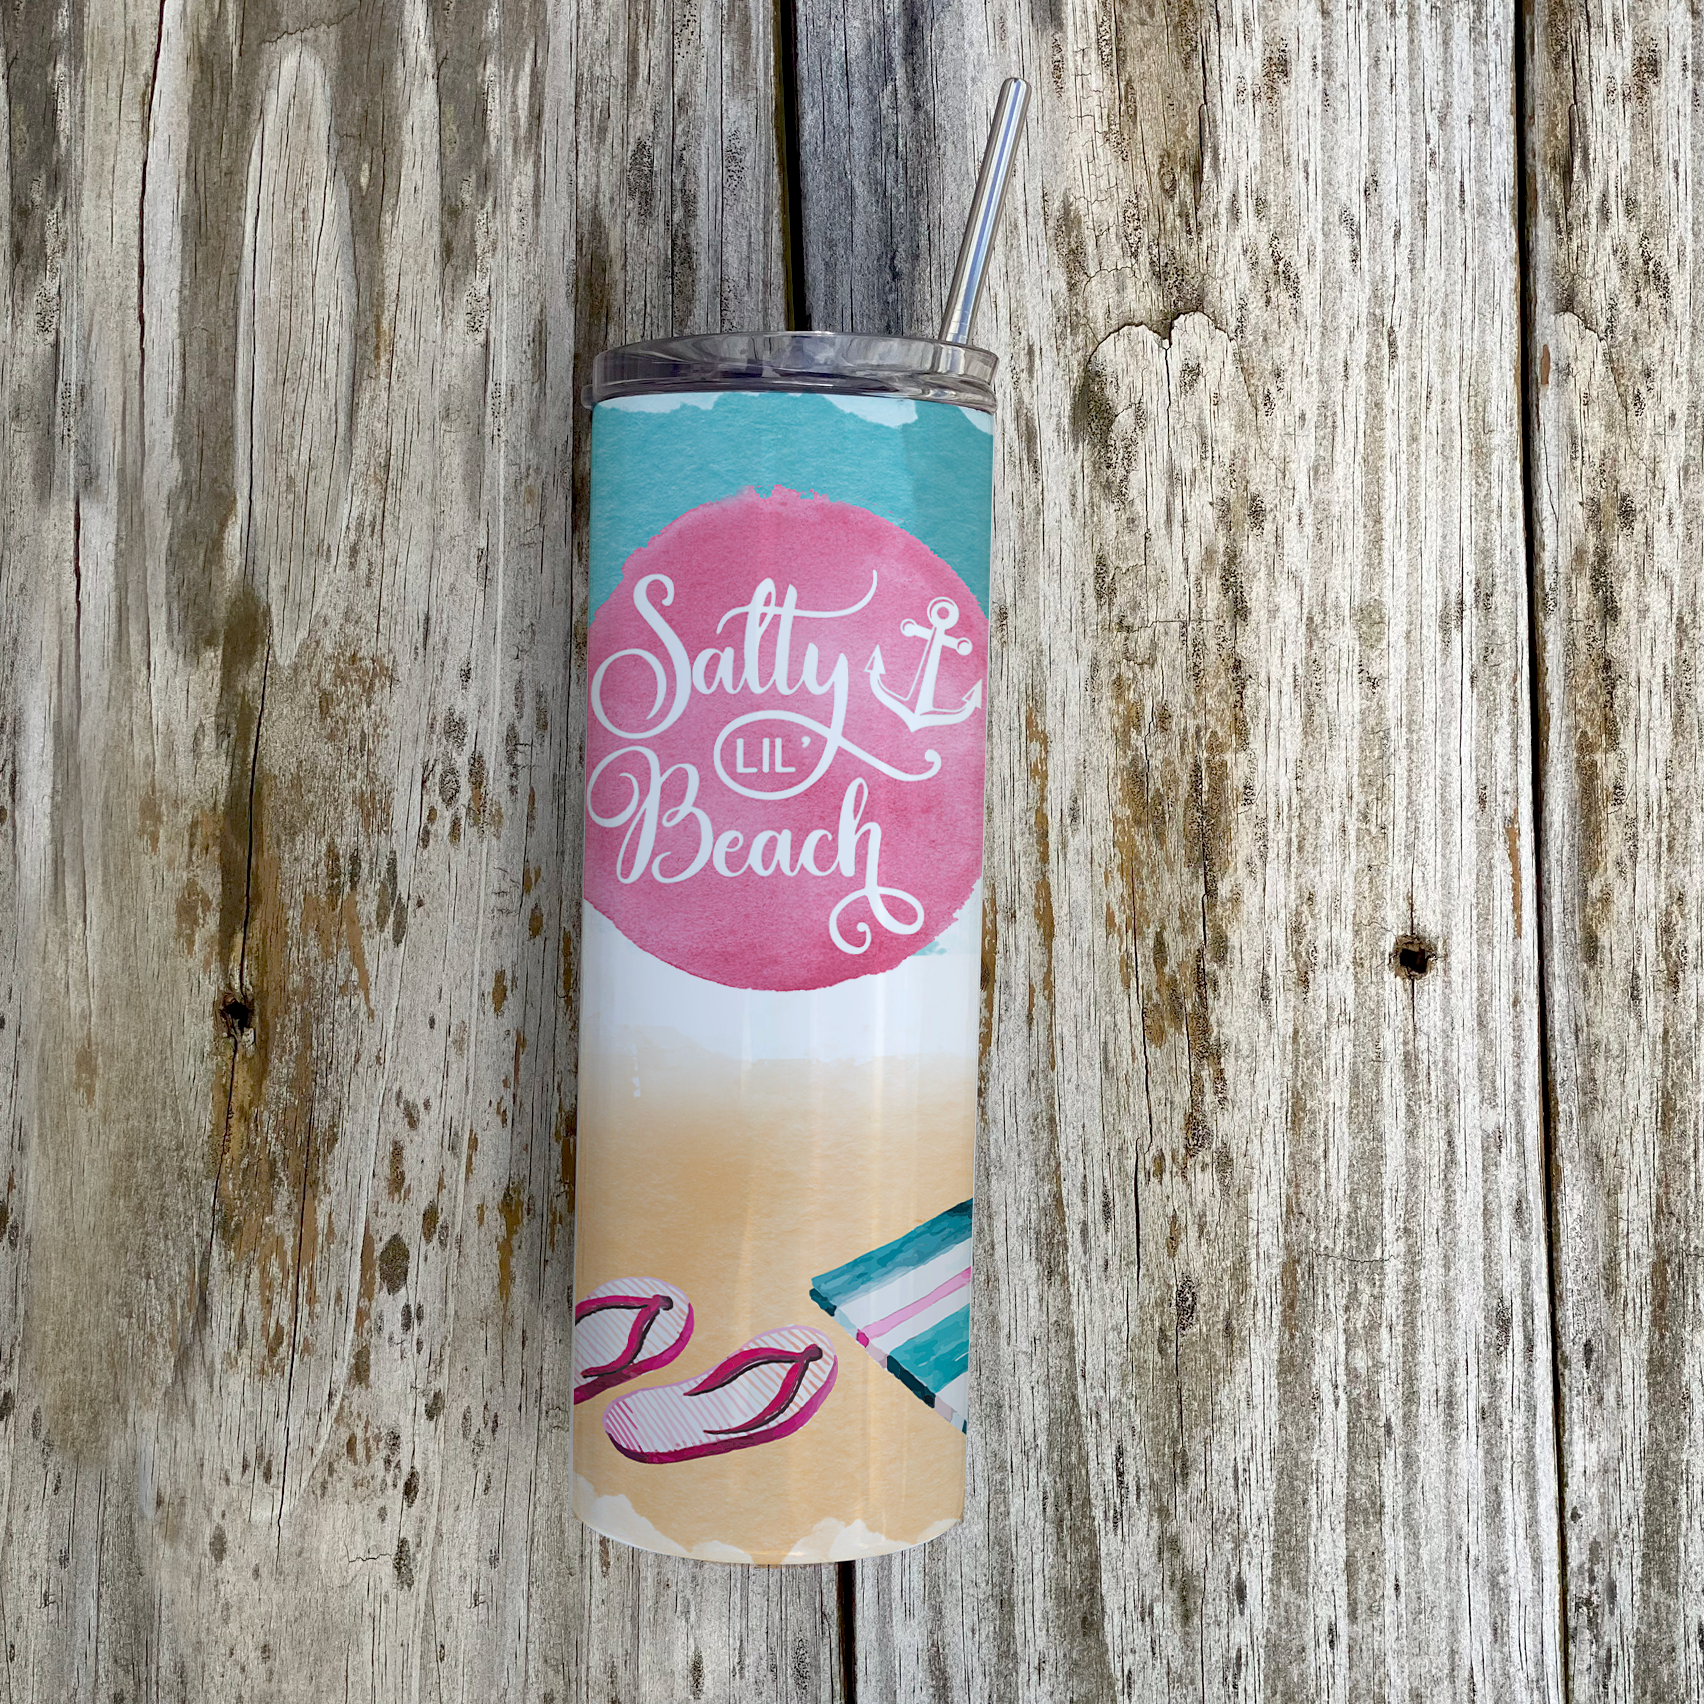 Vacation Collection (Salty Lil' Beach) 20 Oz Stainless Steel Travel Tumbler with Straw